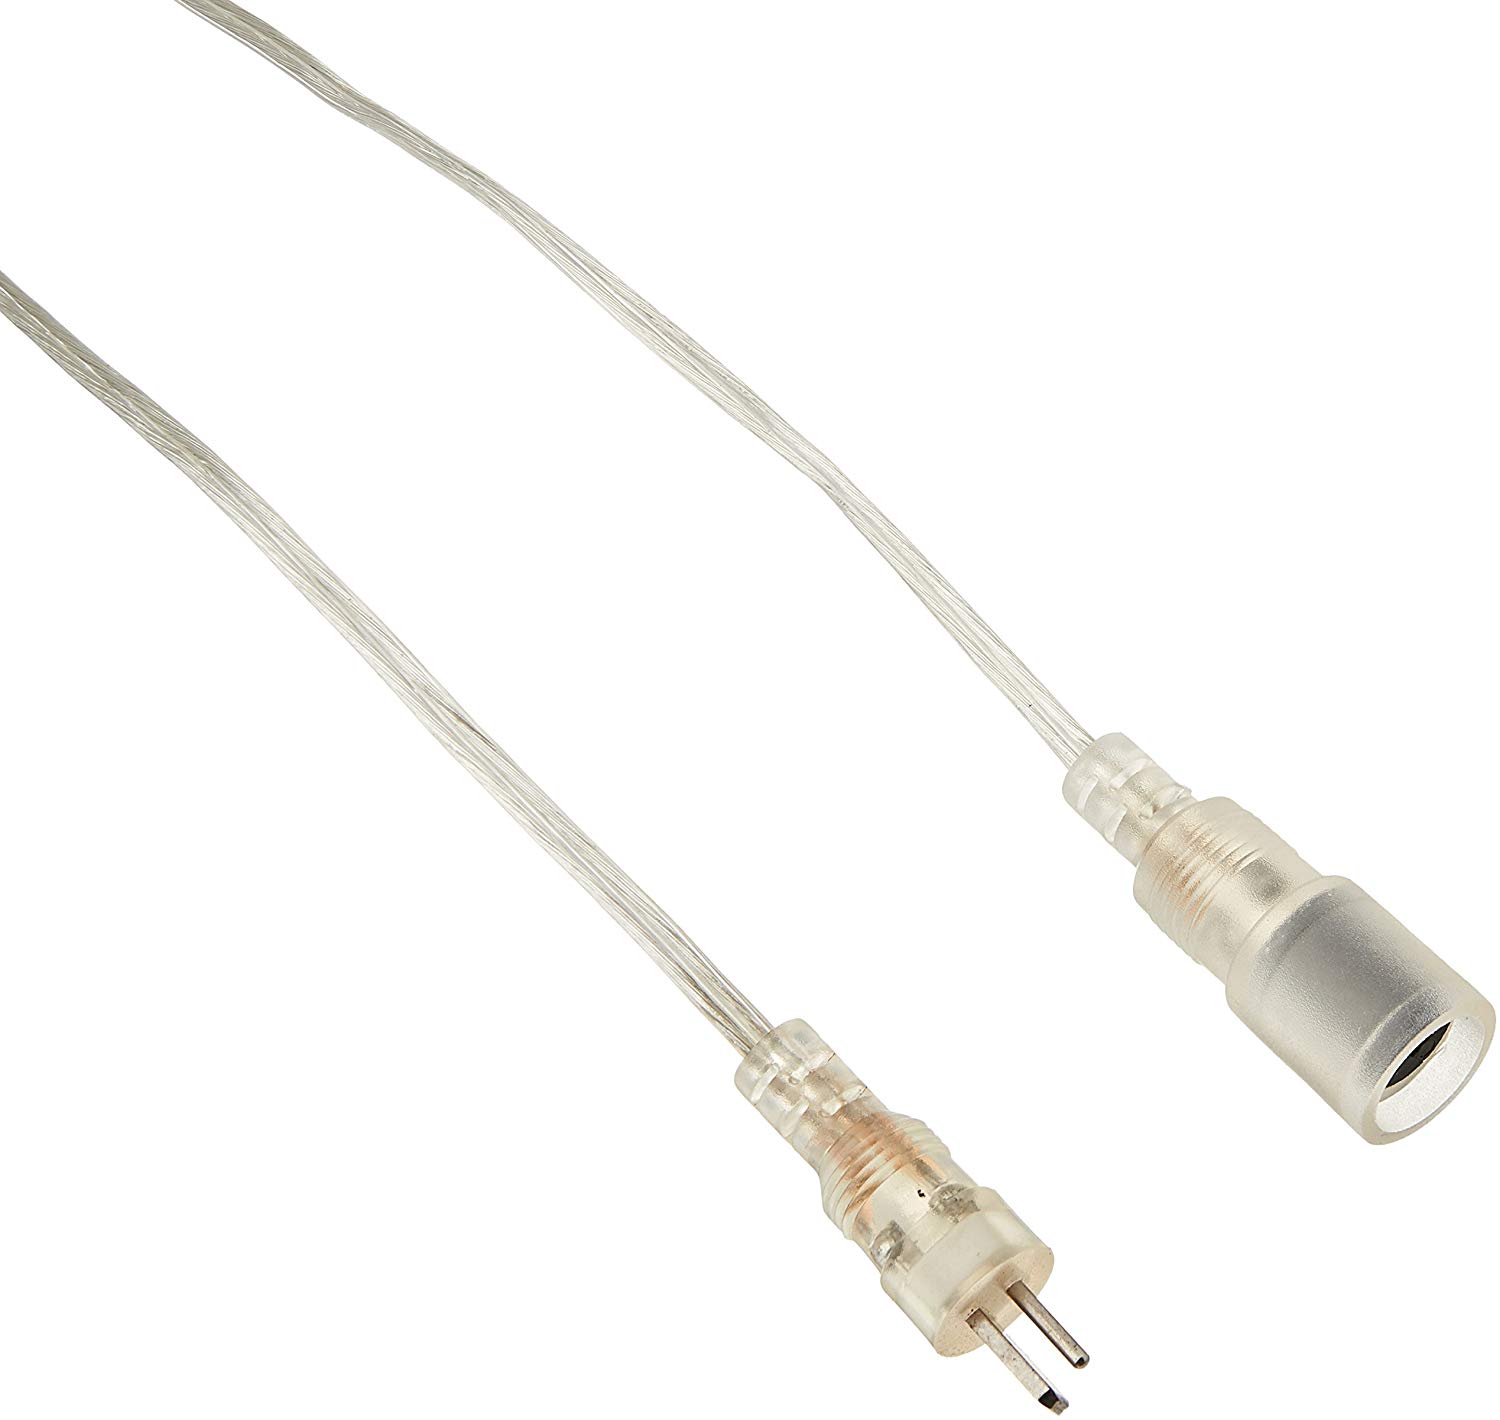 Oase biOrb Extension Lead For Lights Or Pumps (46009)